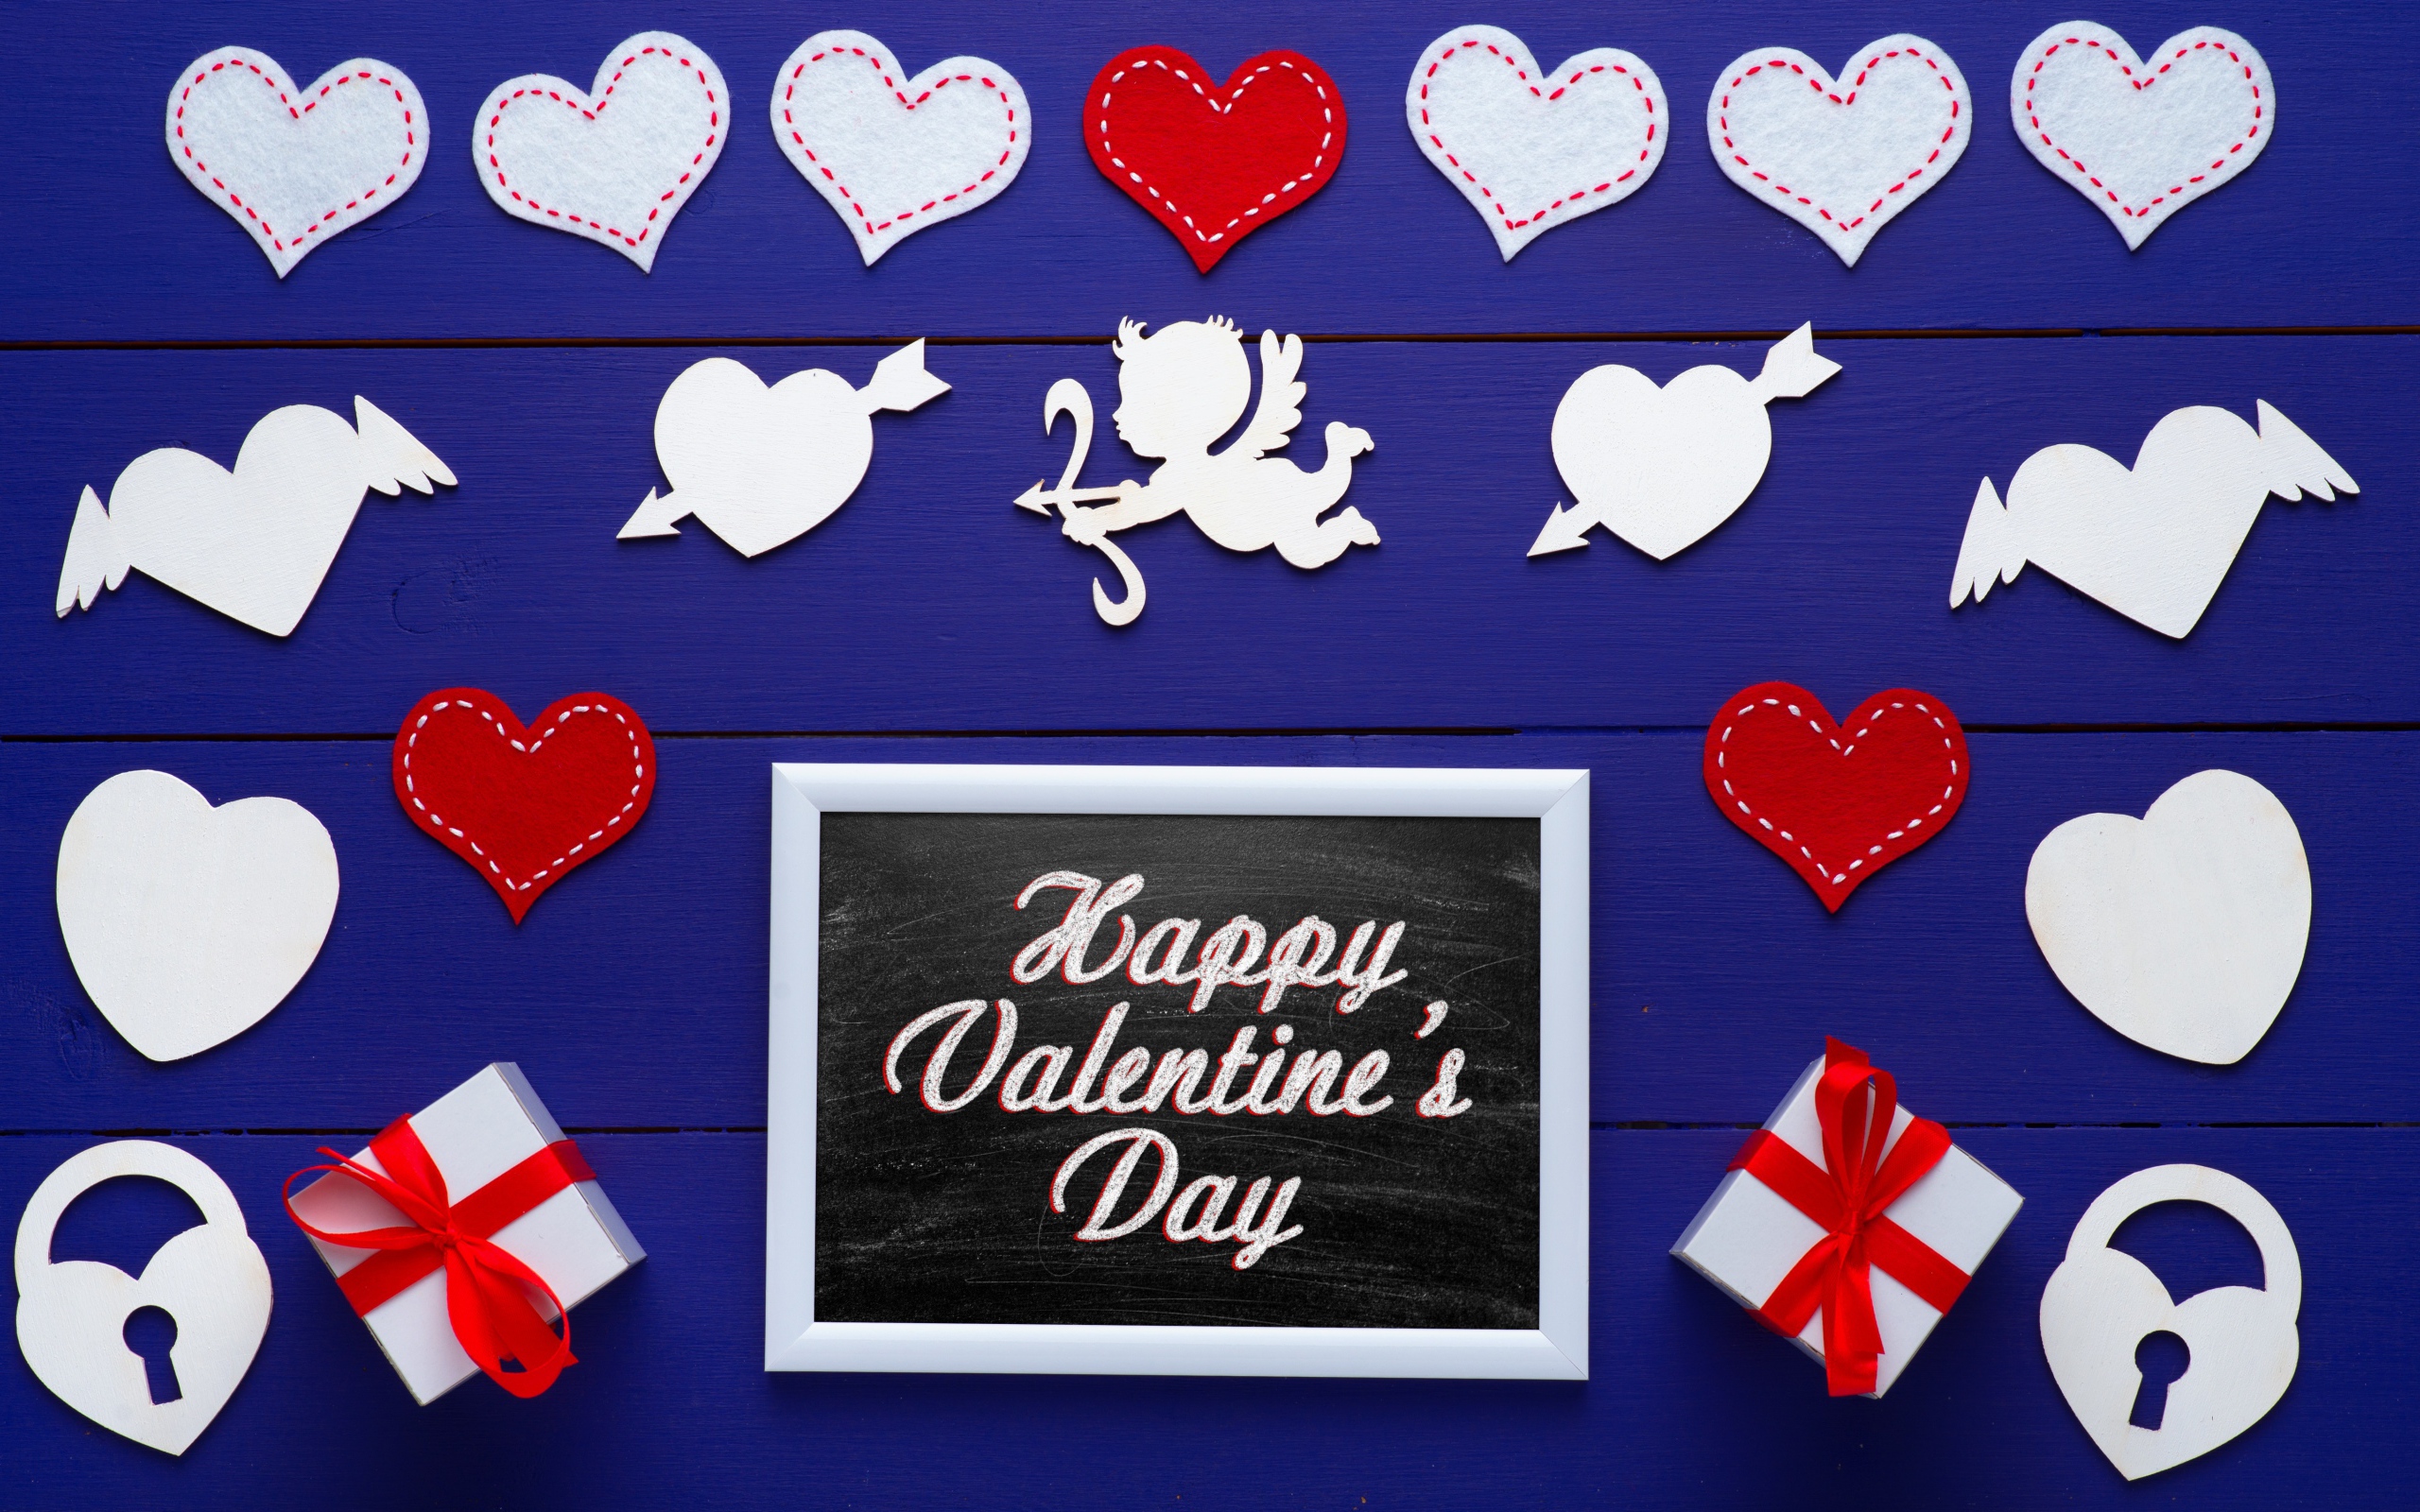 Gifts and hearts on a blue background for Valentine's Day